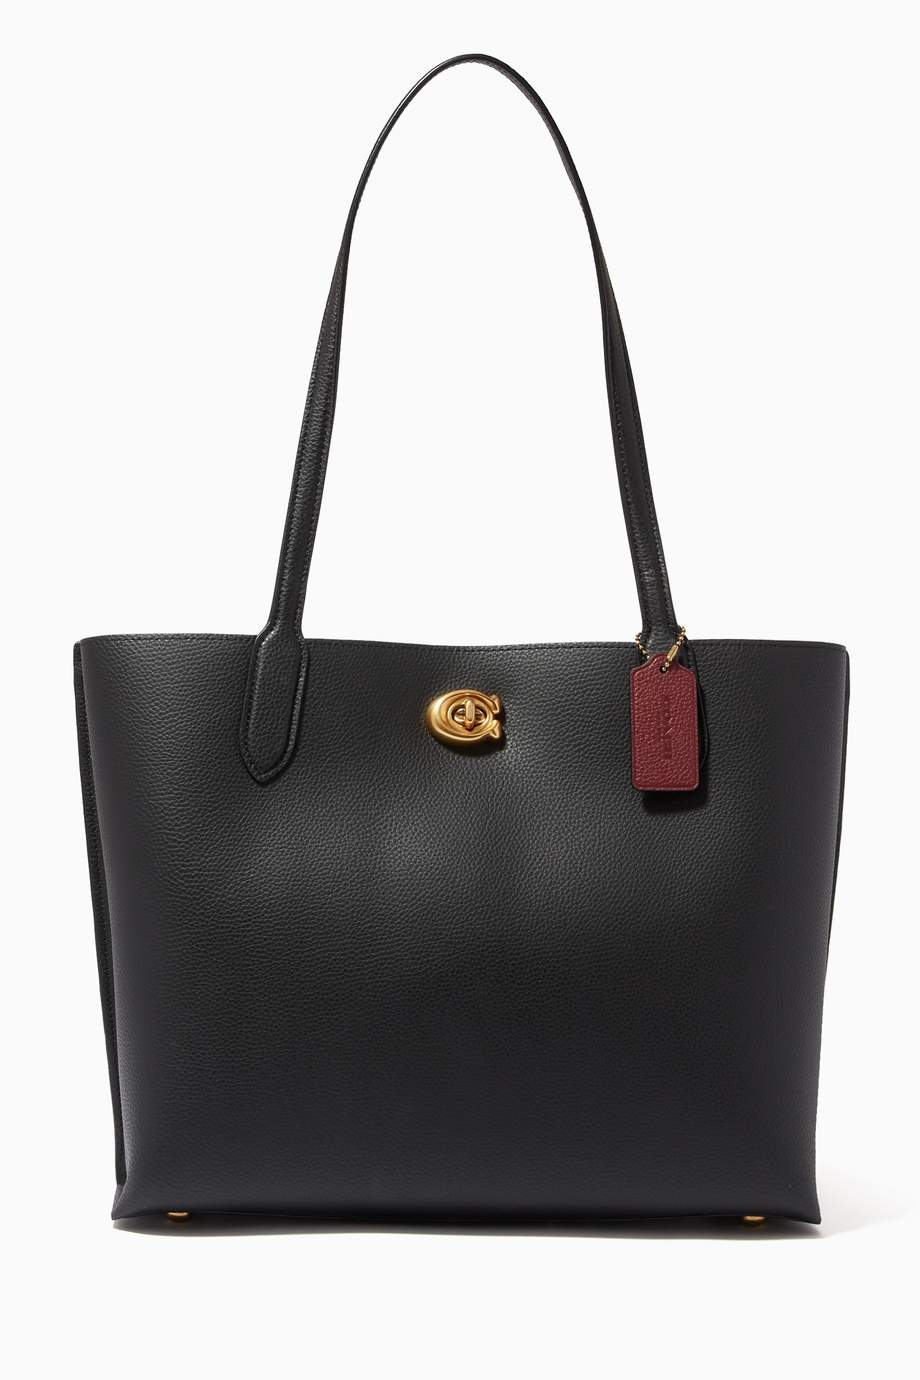 Shop Coach Black Willow Tote in Colorblock Leather for Women | Ounass UAE